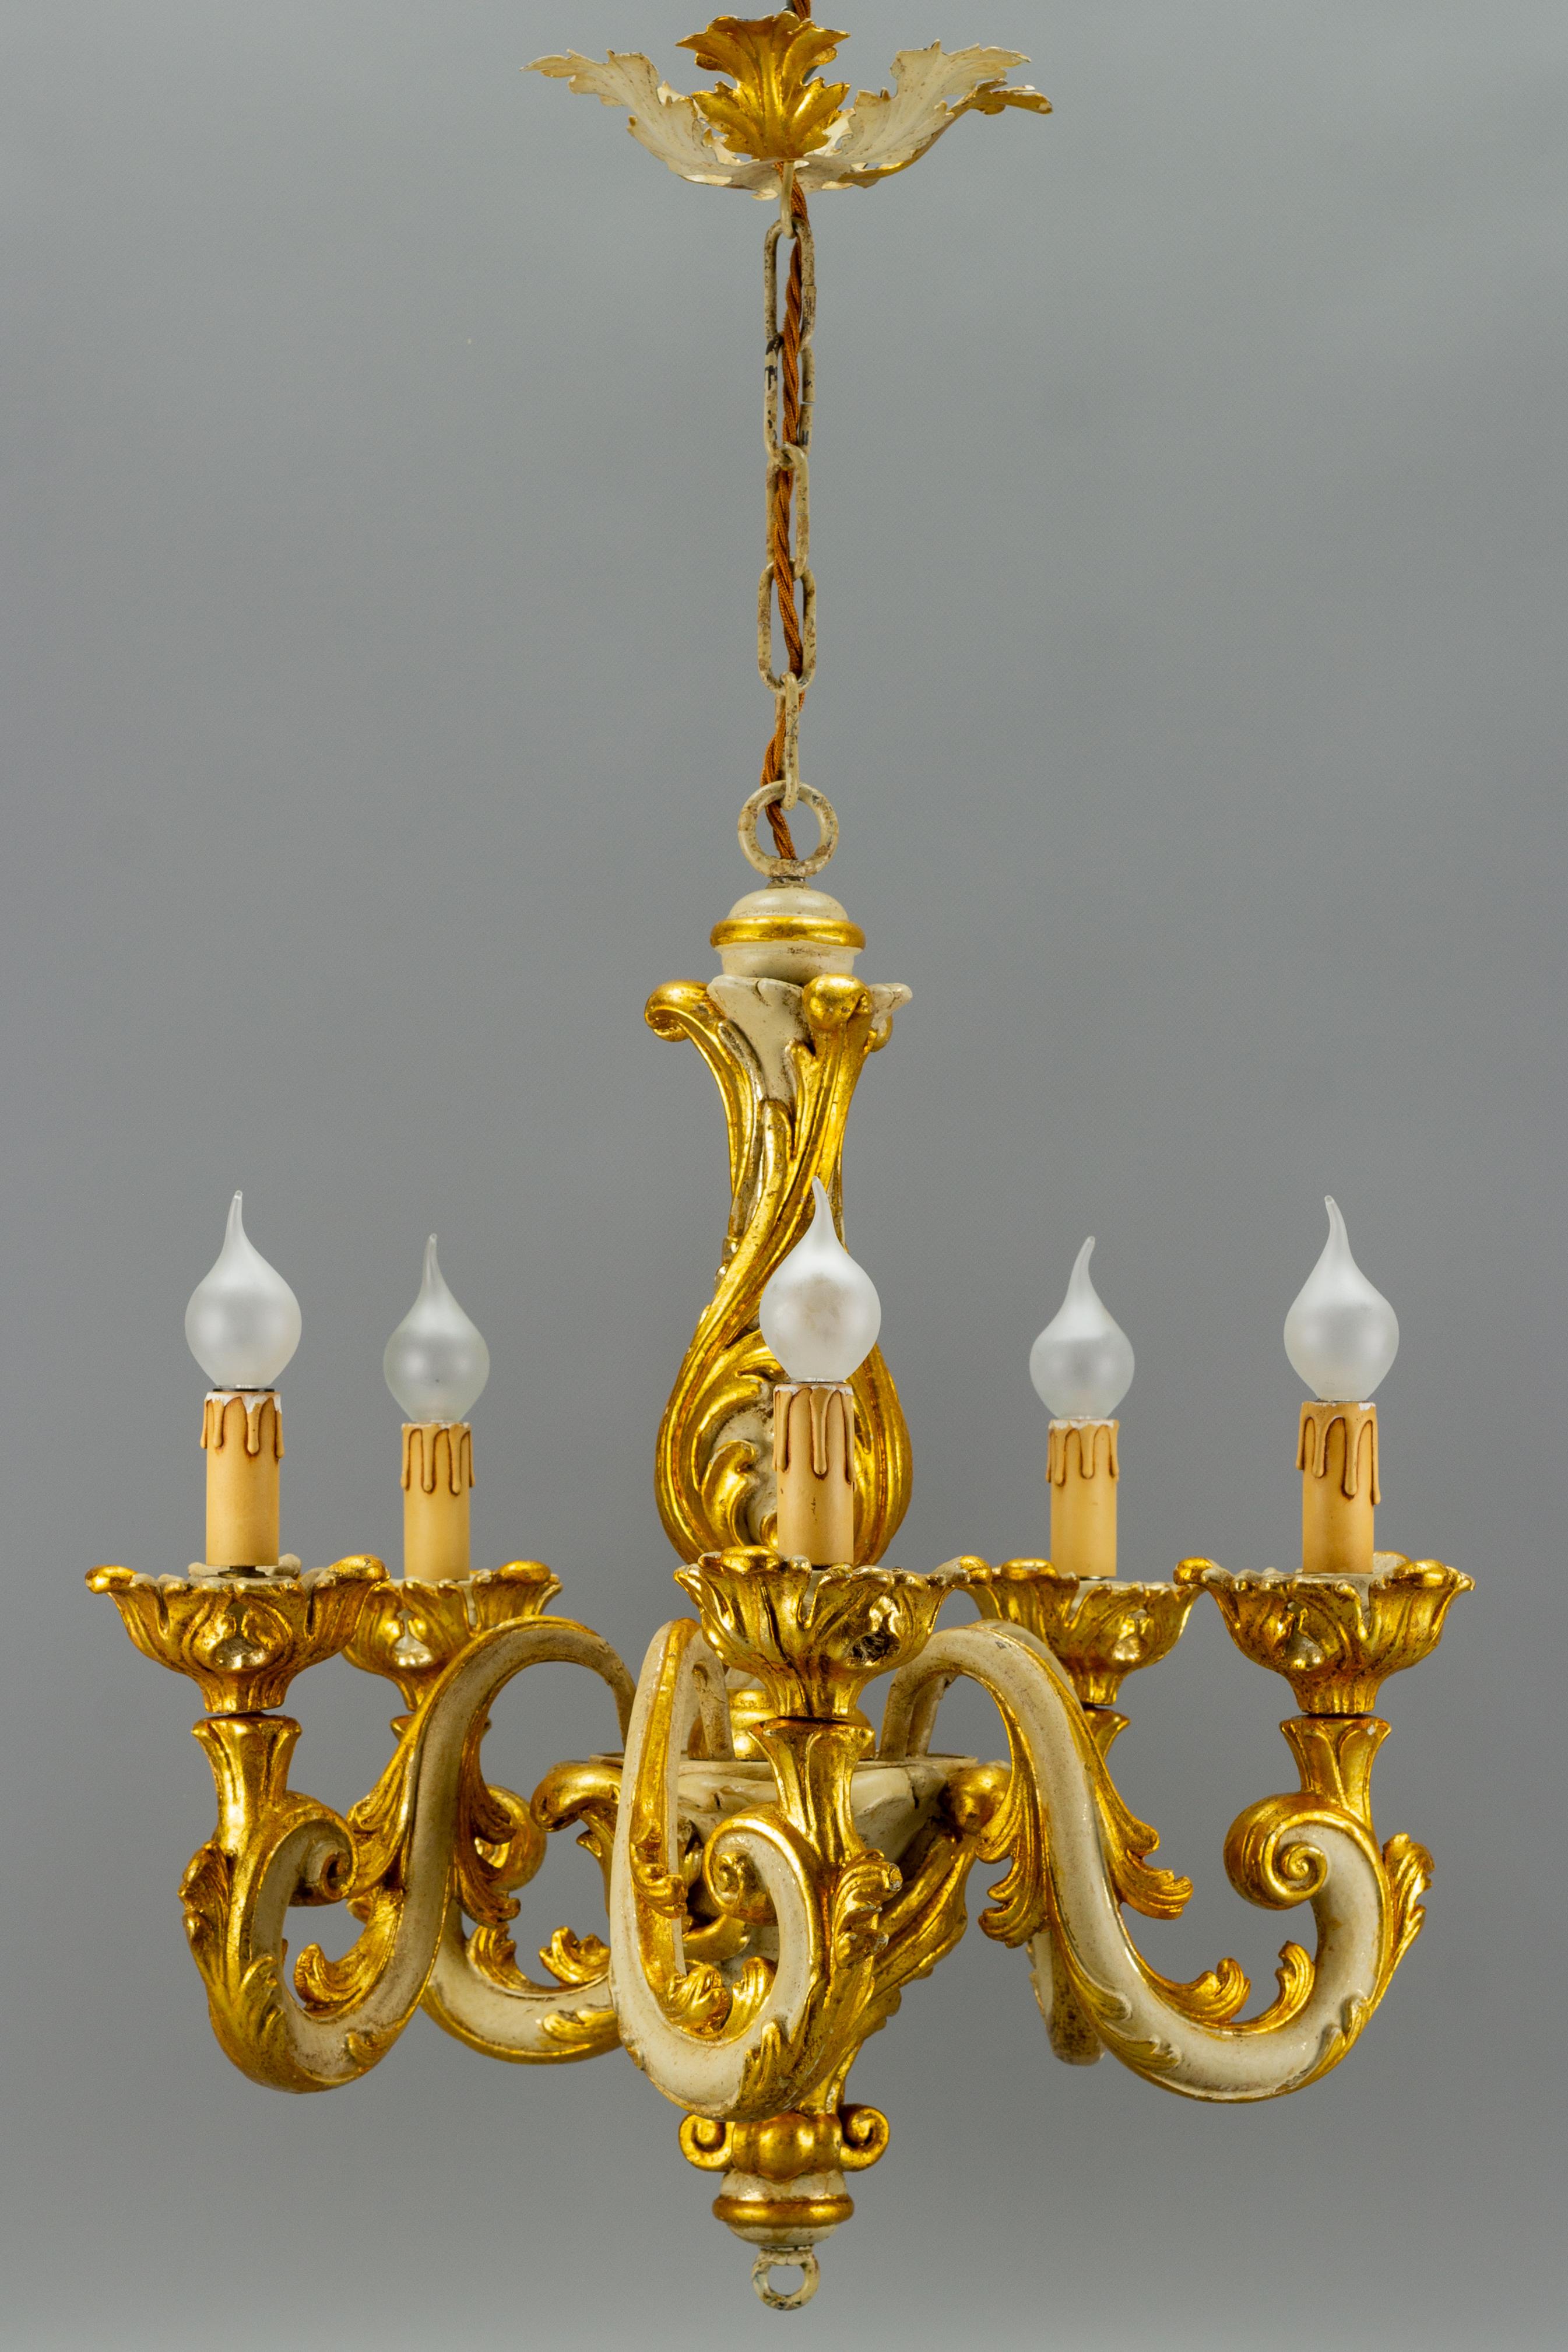 Beautiful Italian vintage chandelier in Rococo style, made of wood and metal. Painted in golden and grey, richly decorated with acanthus leaves motifs. Five arms, each with a socket for E14 size light bulb.
Dimensions: height: 85 cm / 33.46 in;